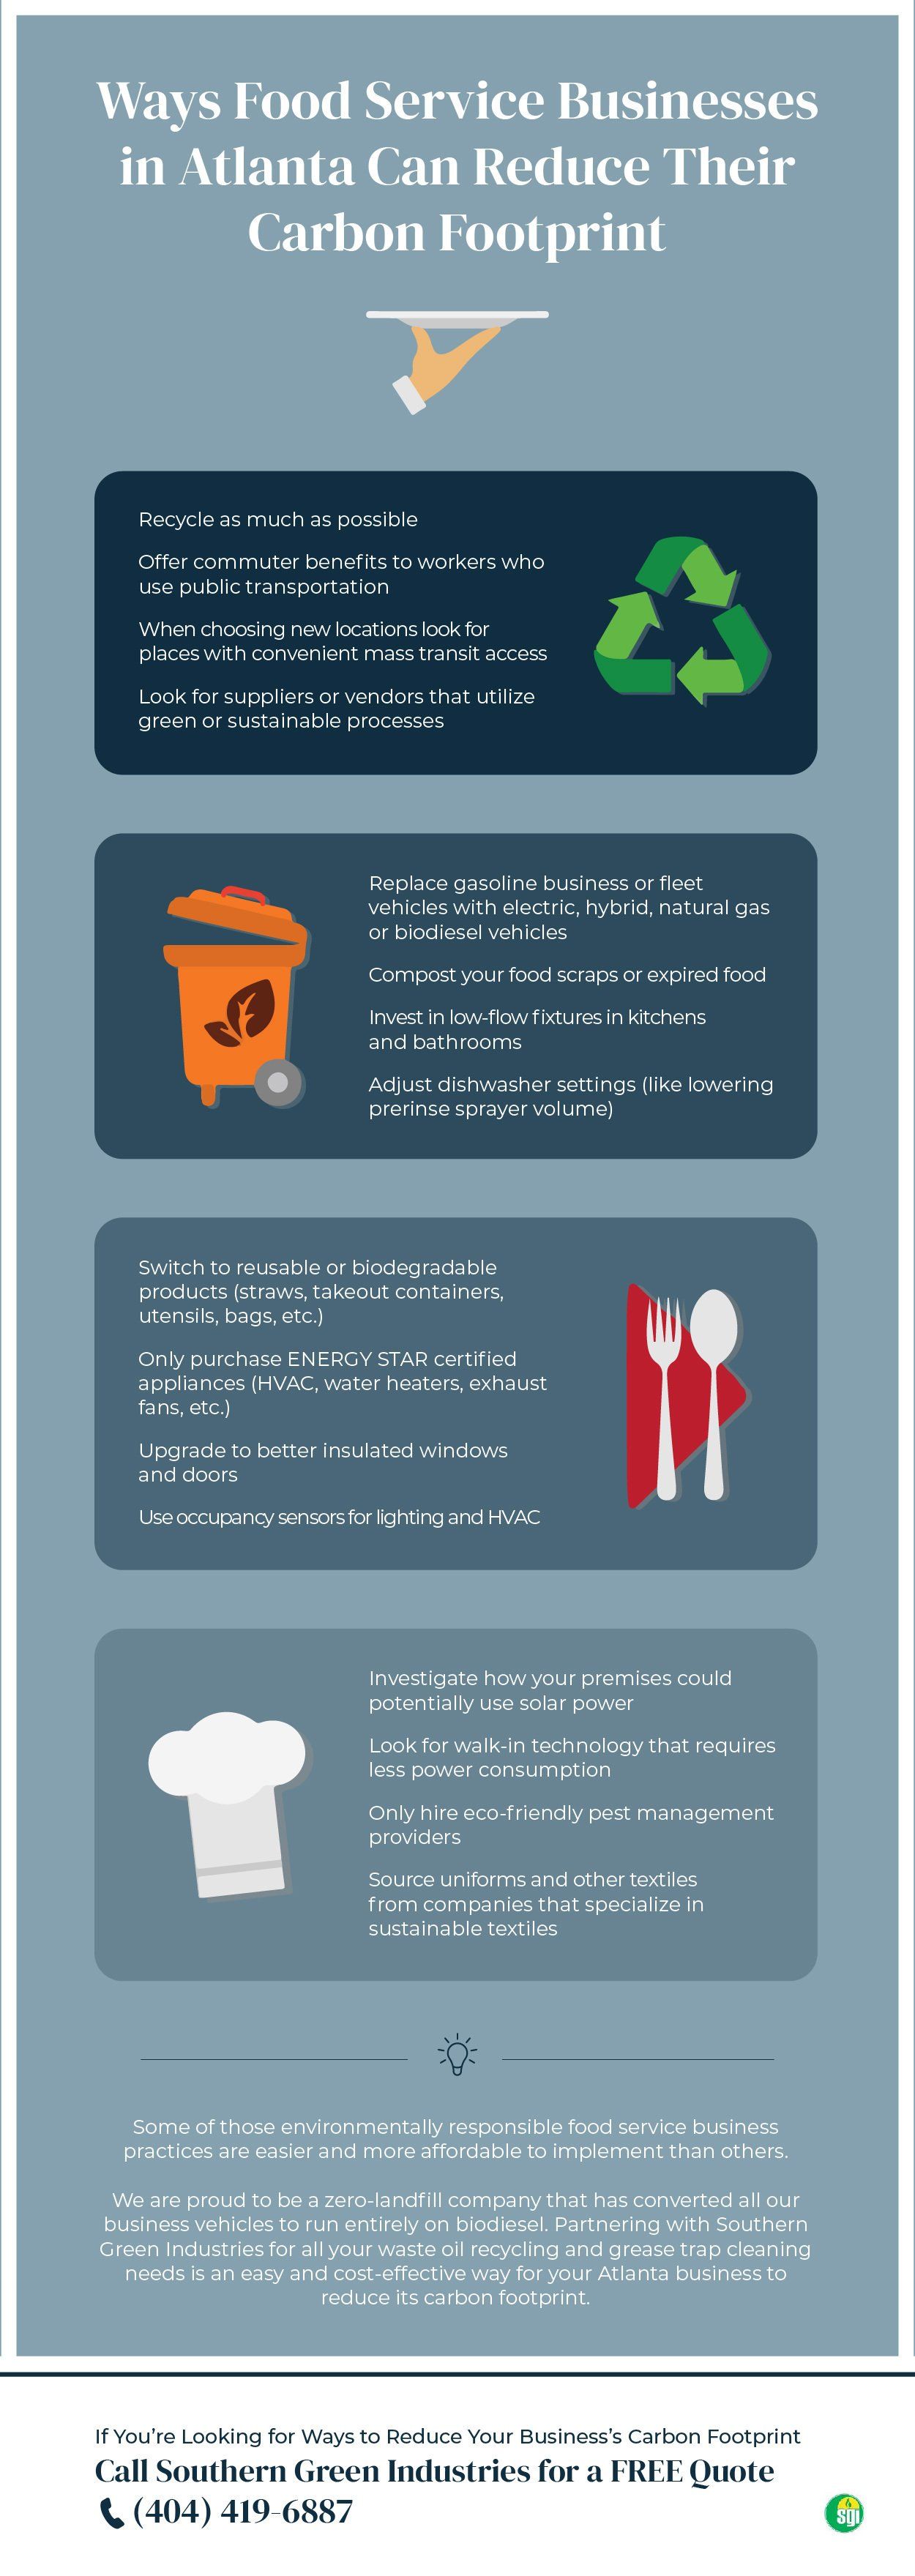 Ways Food Service Businesses in Atlanta Can Reduce Carbon Footprint graphic